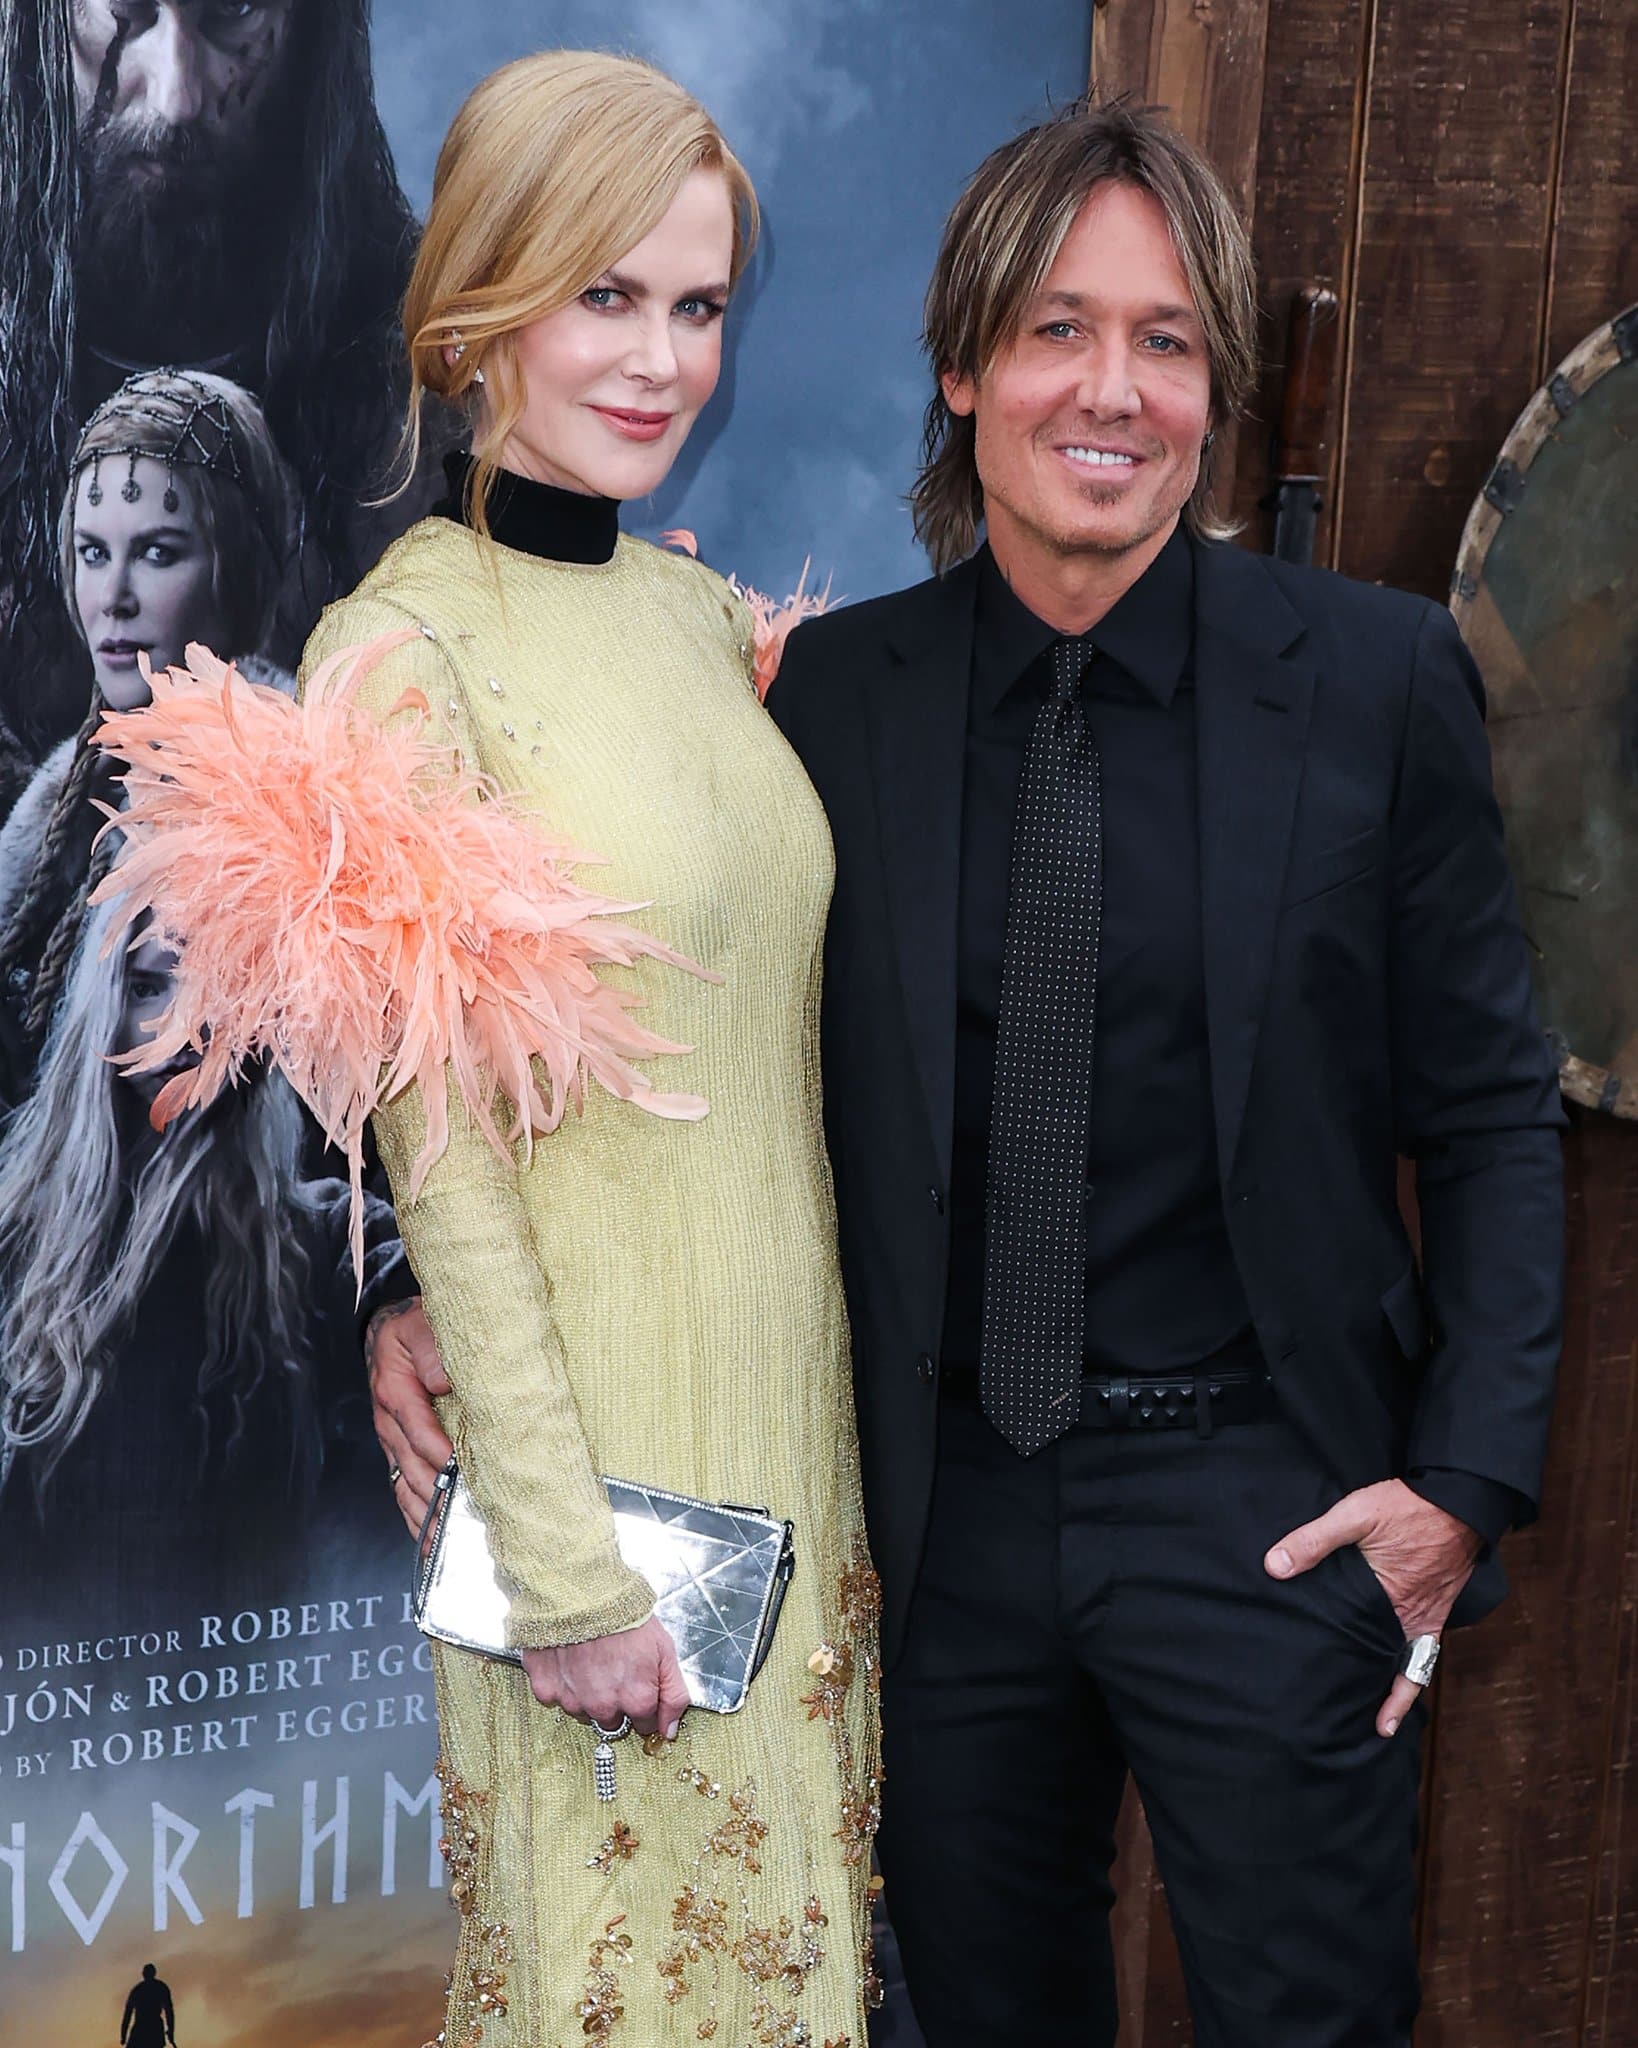 Country singer Keith Urban joins his wife Nicole Kidman at The Northman Los Angeles premiere on April 18, 2022